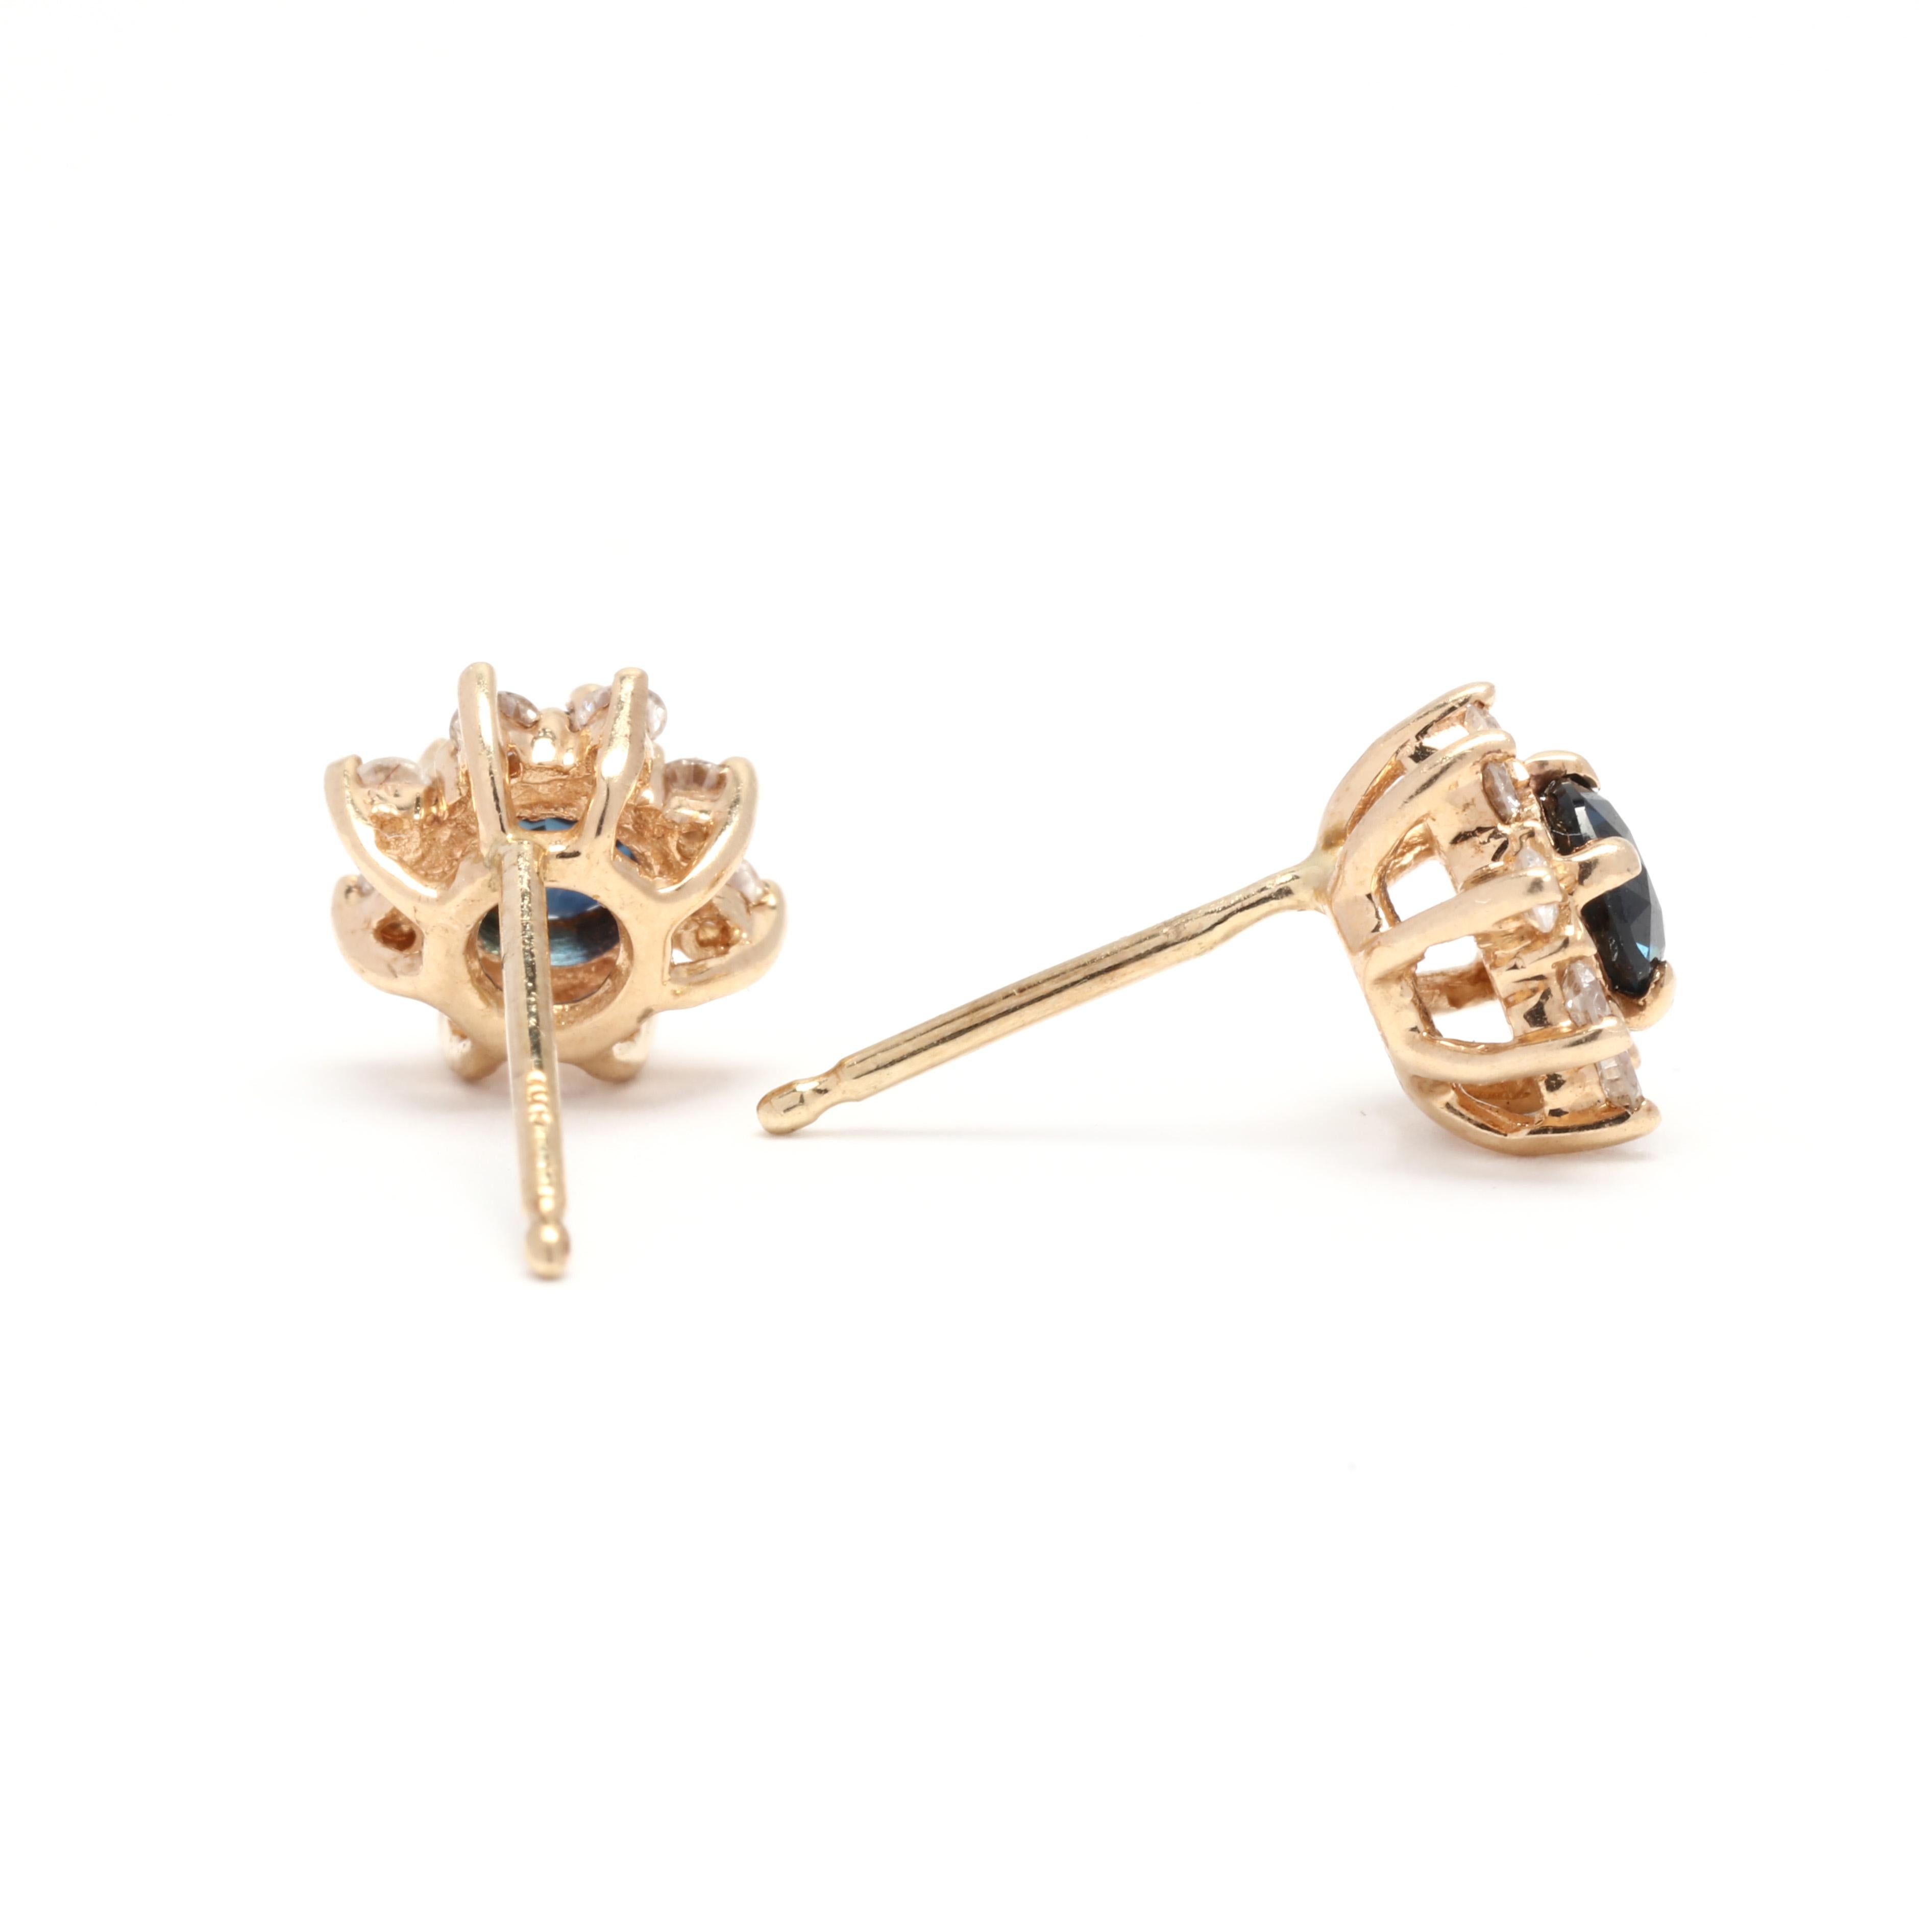 A pair of 14 karat yellow gold sapphire and diamond stud earrings. These earrings feature prong set round cut sapphires weighing approximately .50 total carats surrounded by a halo of full cut round diamonds weighing approximately .20 total carats